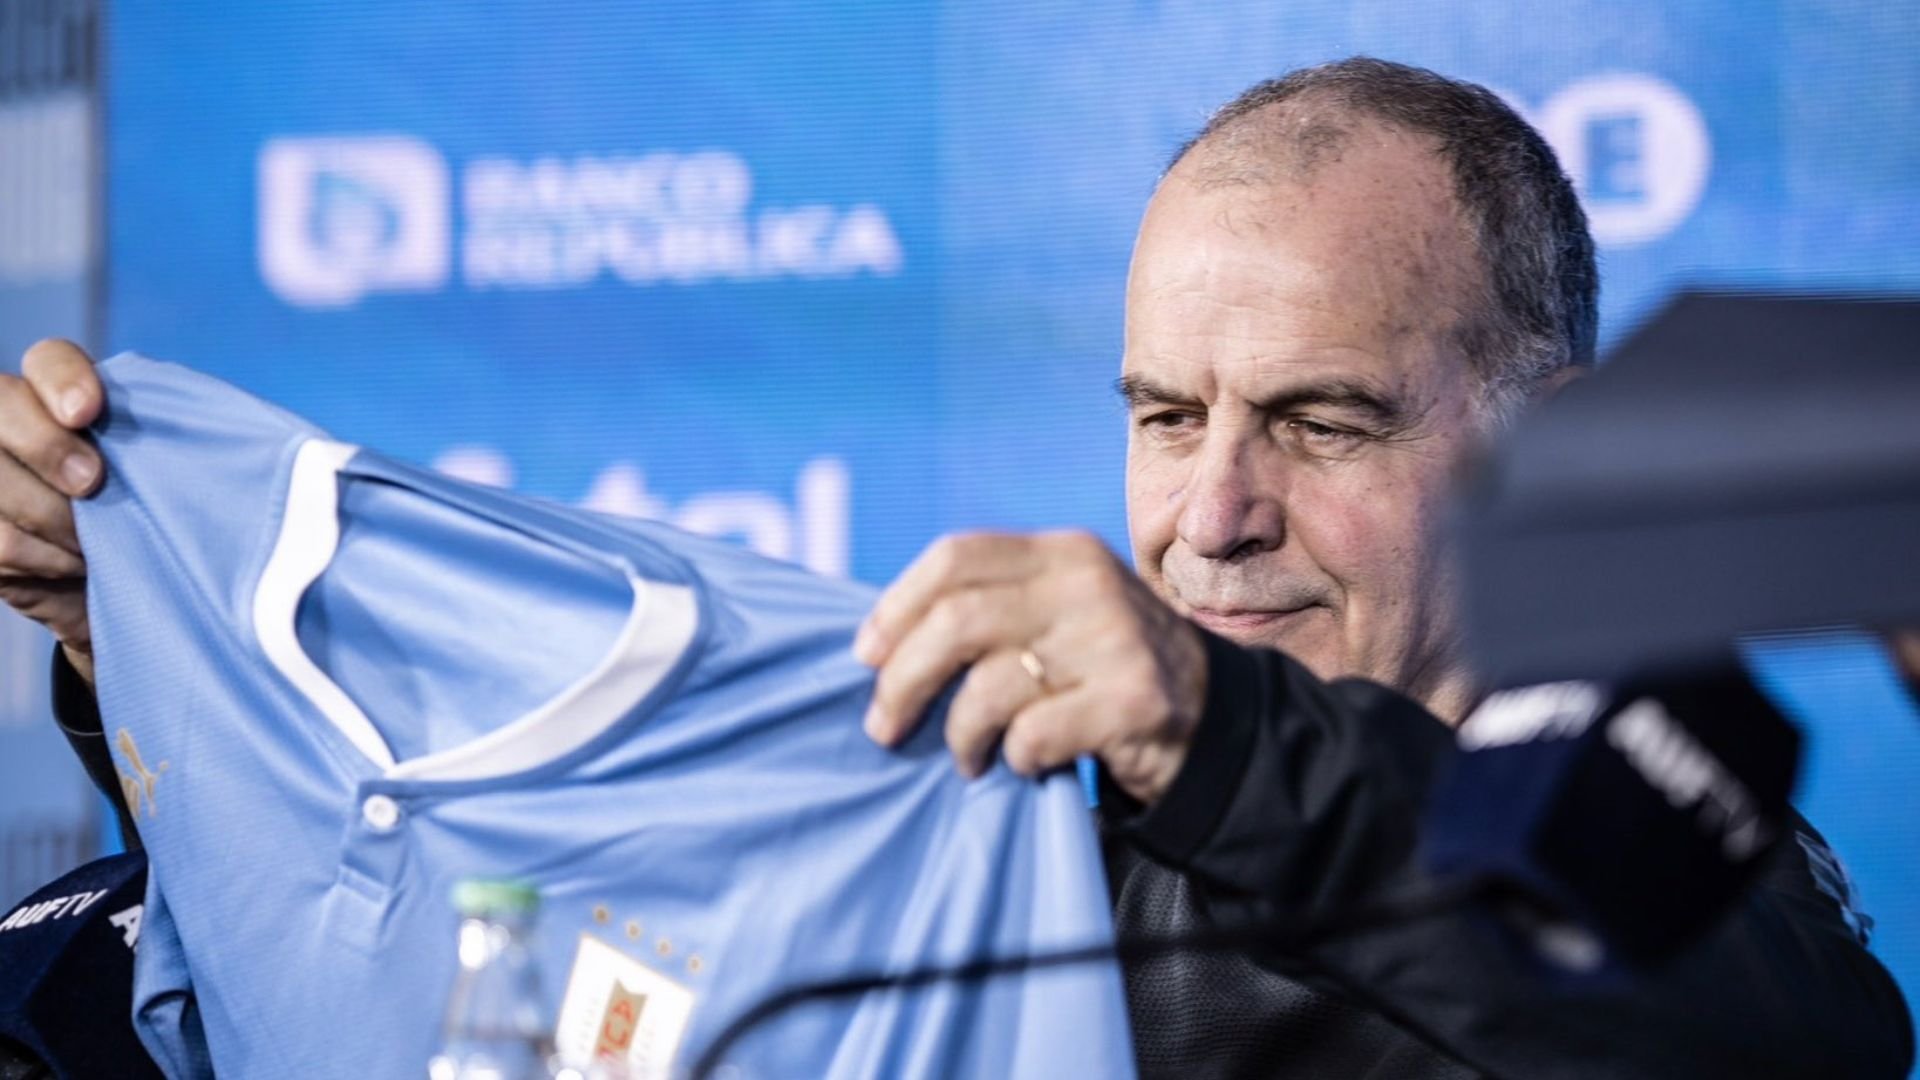 Marcelo Bielsa has been introduced as the new coach of the Uruguay national team